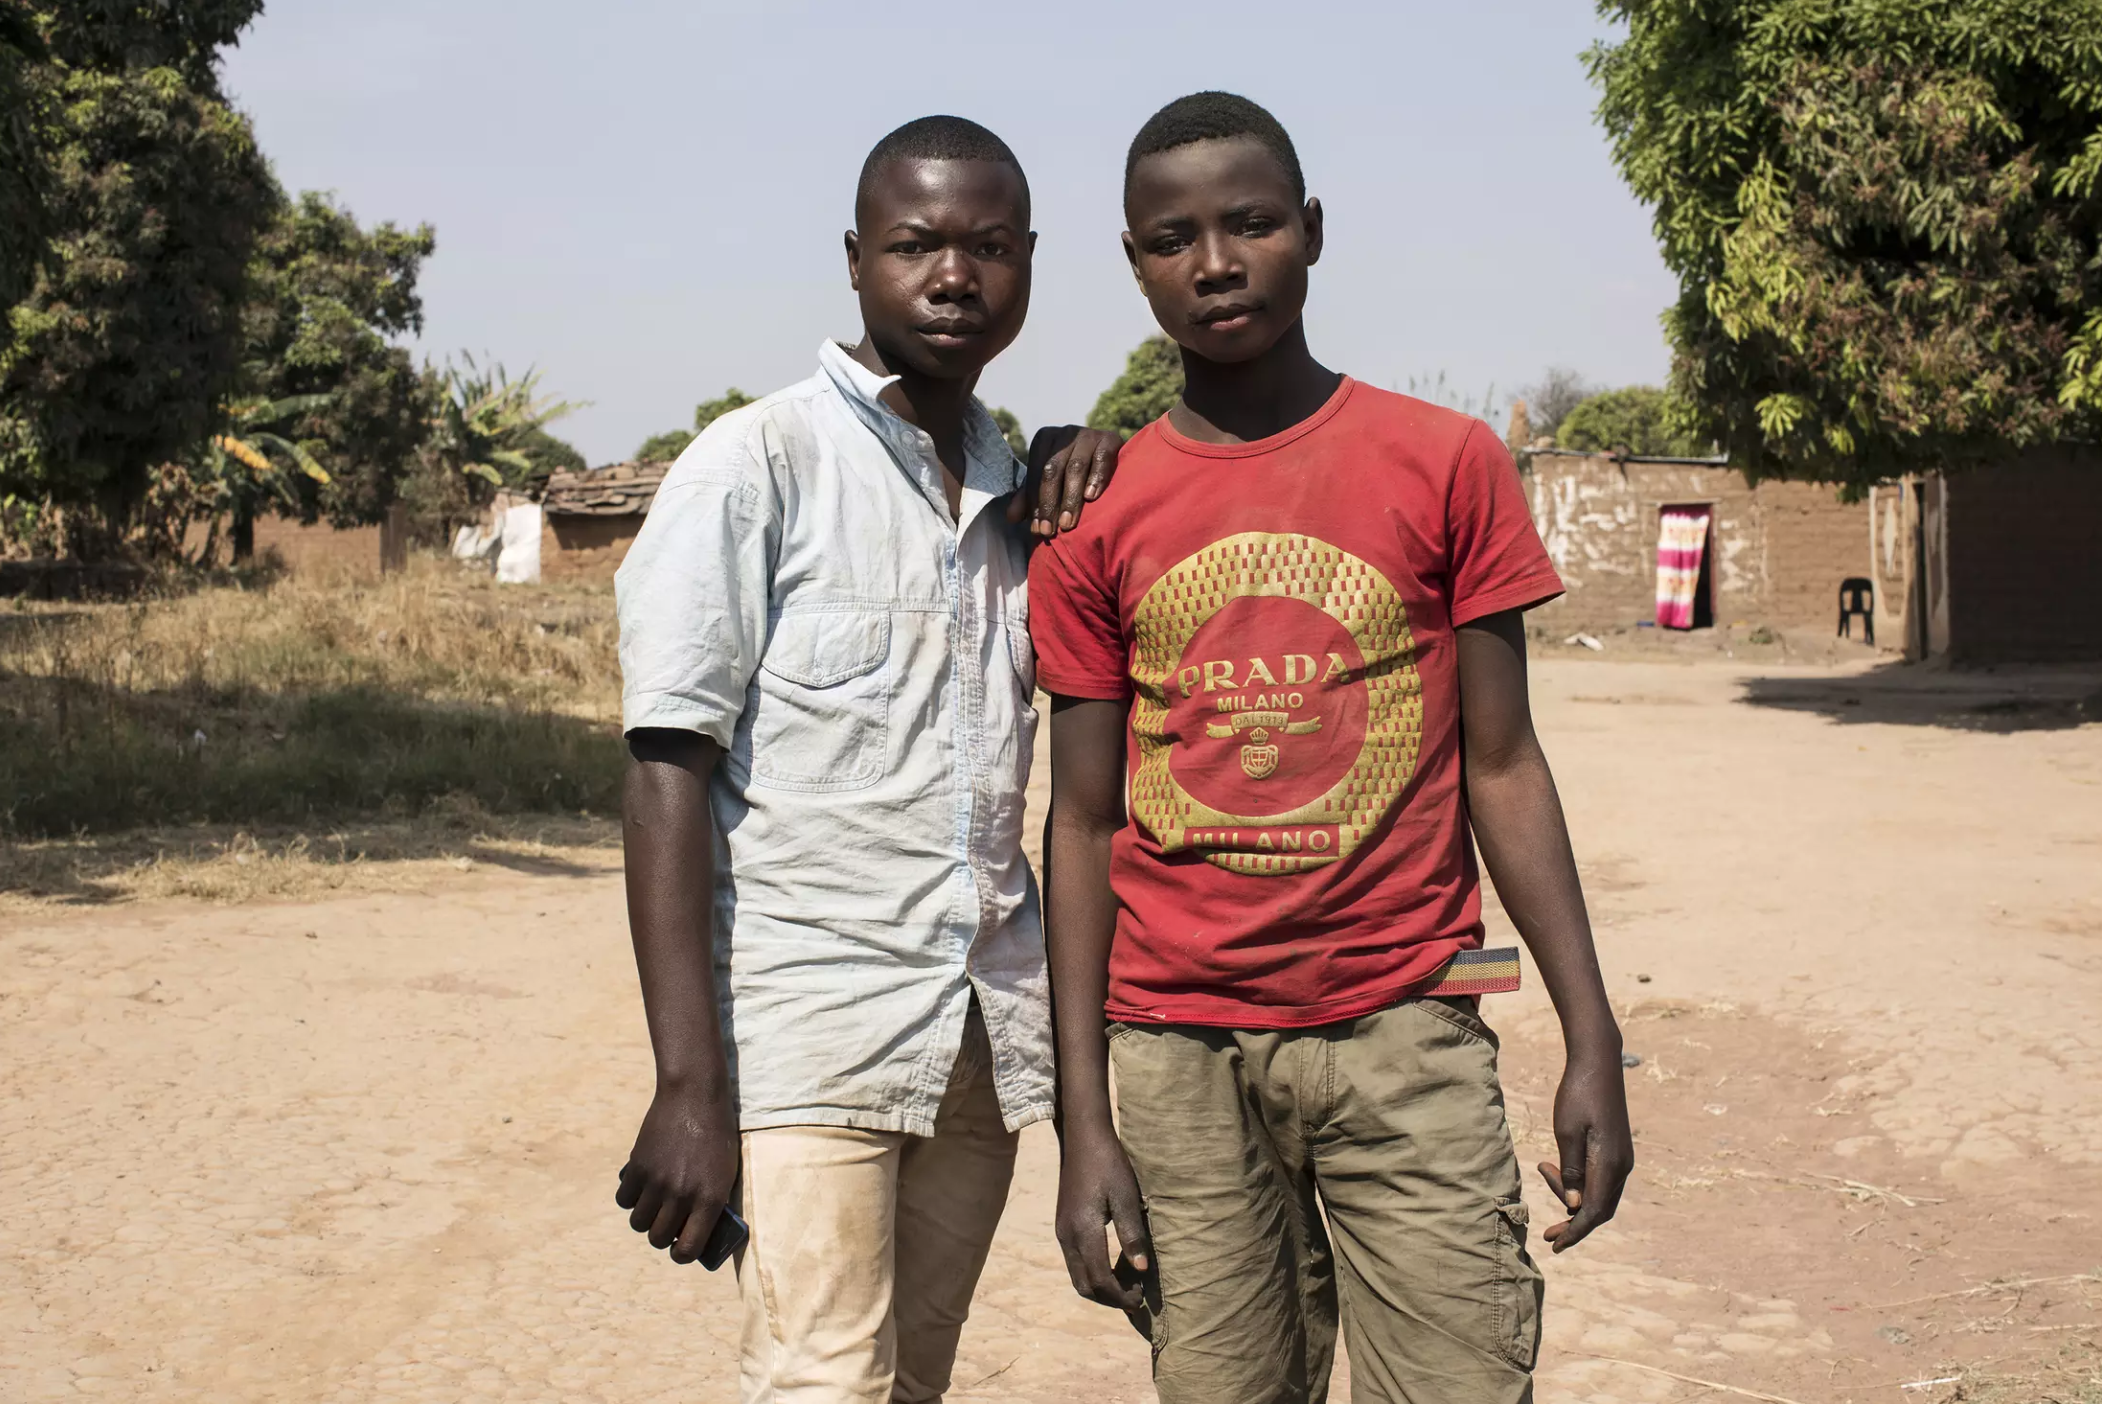 (L) Thomas Muyumba (16) used to work in a cobalt mine, but is now on an Apple funded apprenticeship. His friend, (R) Lukasa (15) continues to work in a cobalt mine. Image by Sebastian Meyer. Democratic Republic of Congo, 2018.